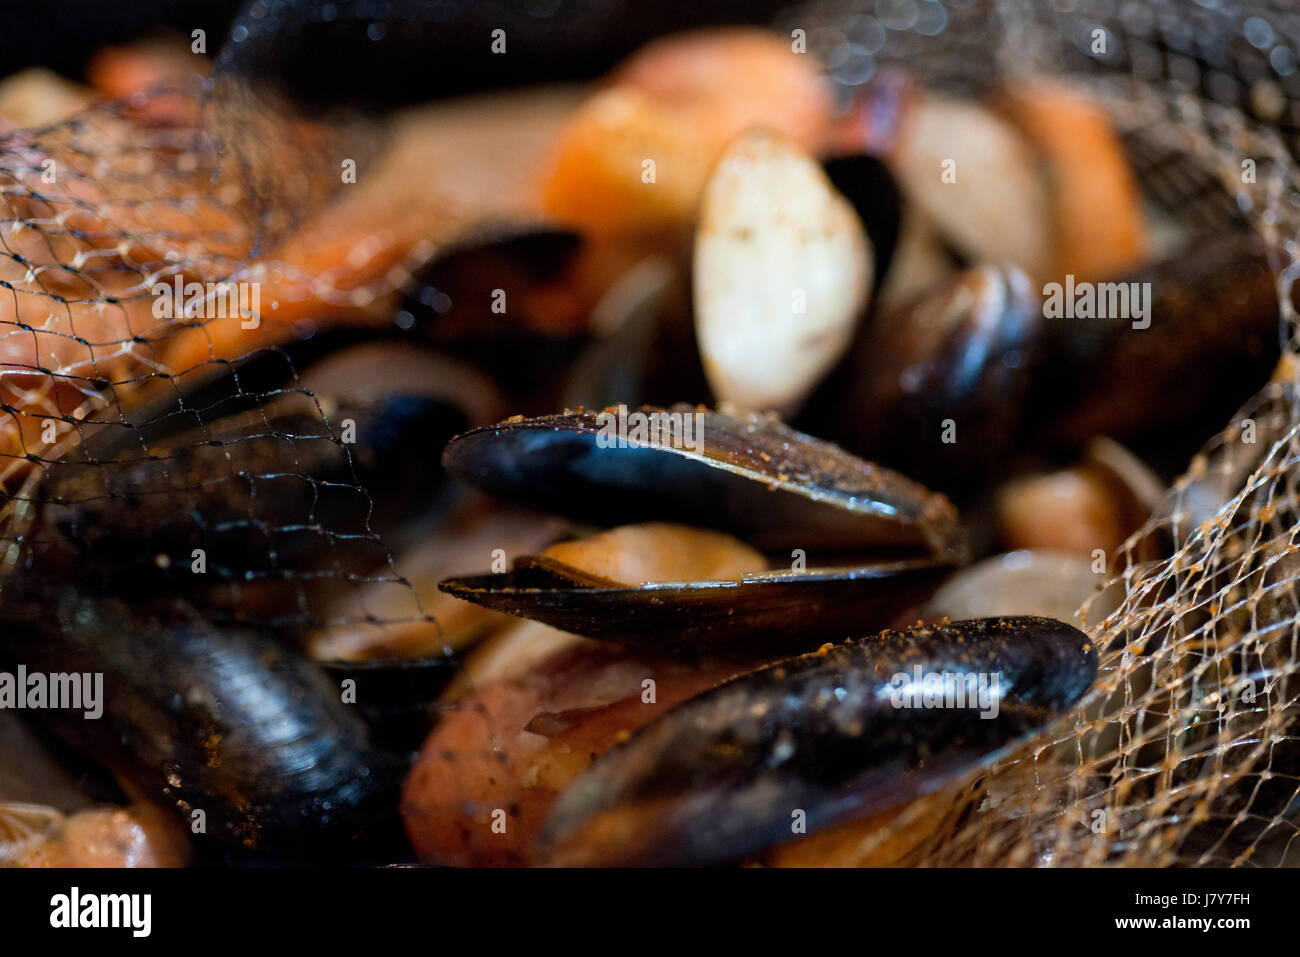 Le vongole, i gamberi, mussles, cuocere in pentola Foto Stock